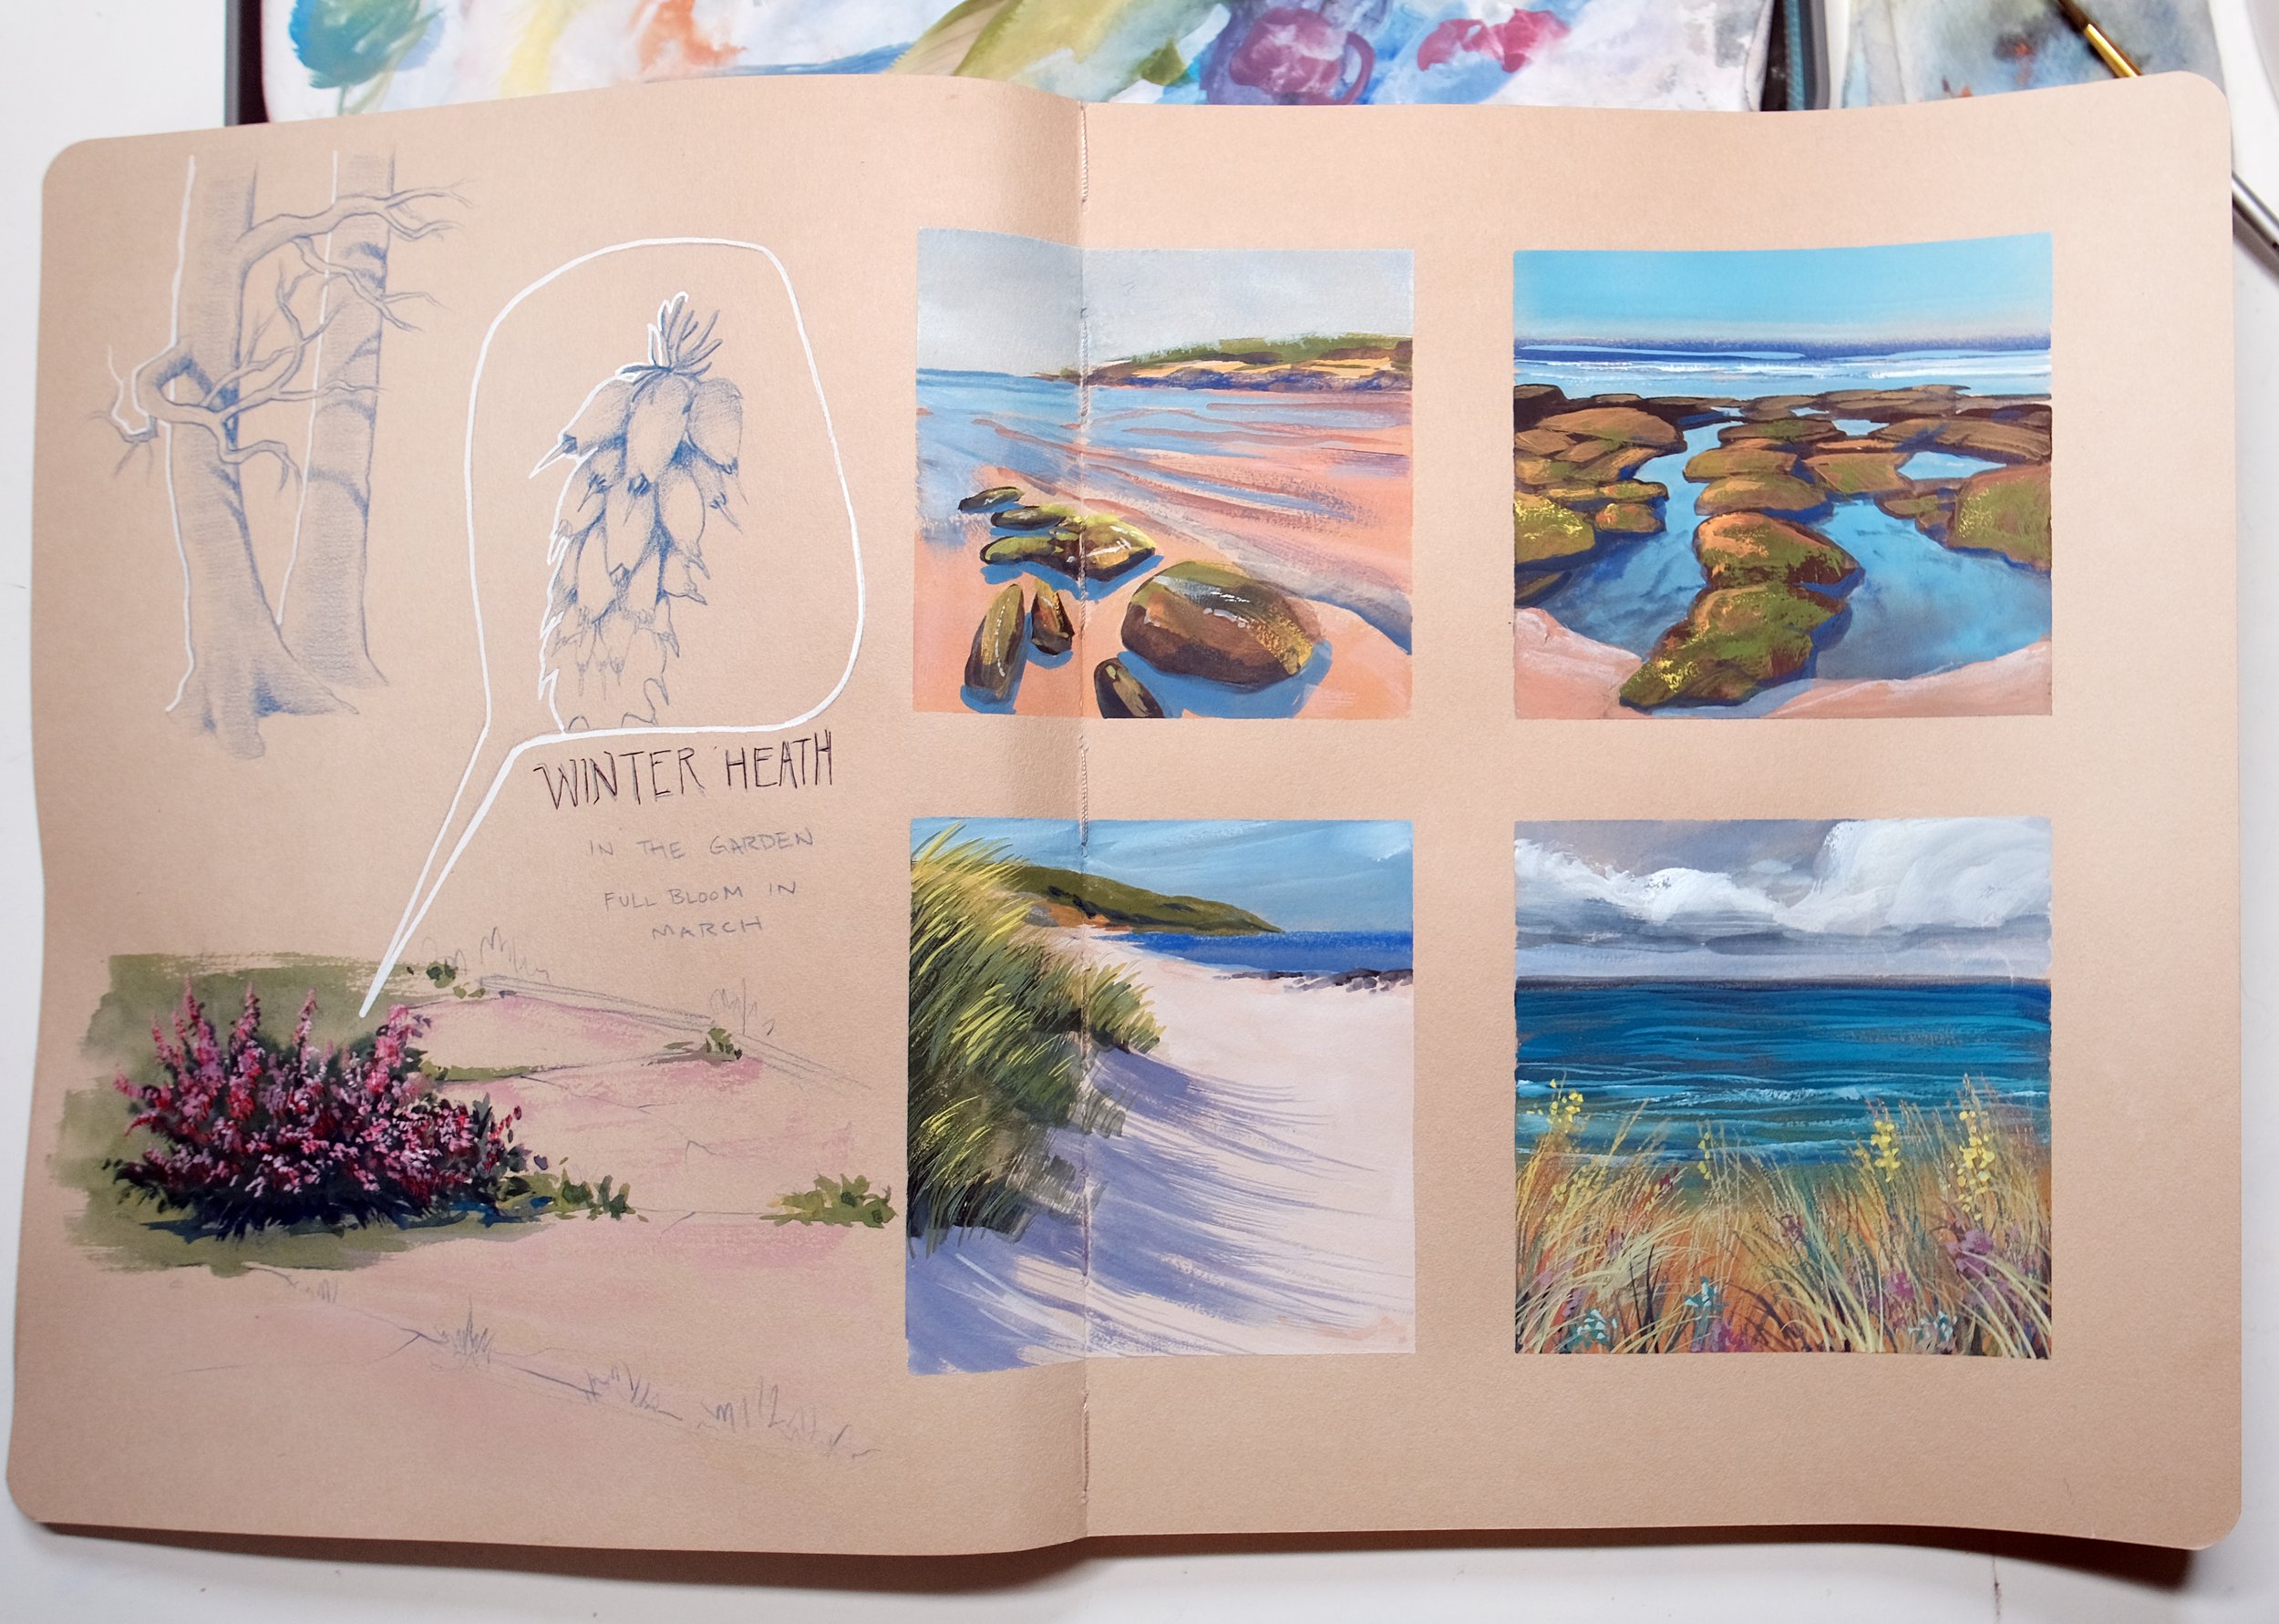 What Is Gouache Paint? How to Use It and More on Bluprint!